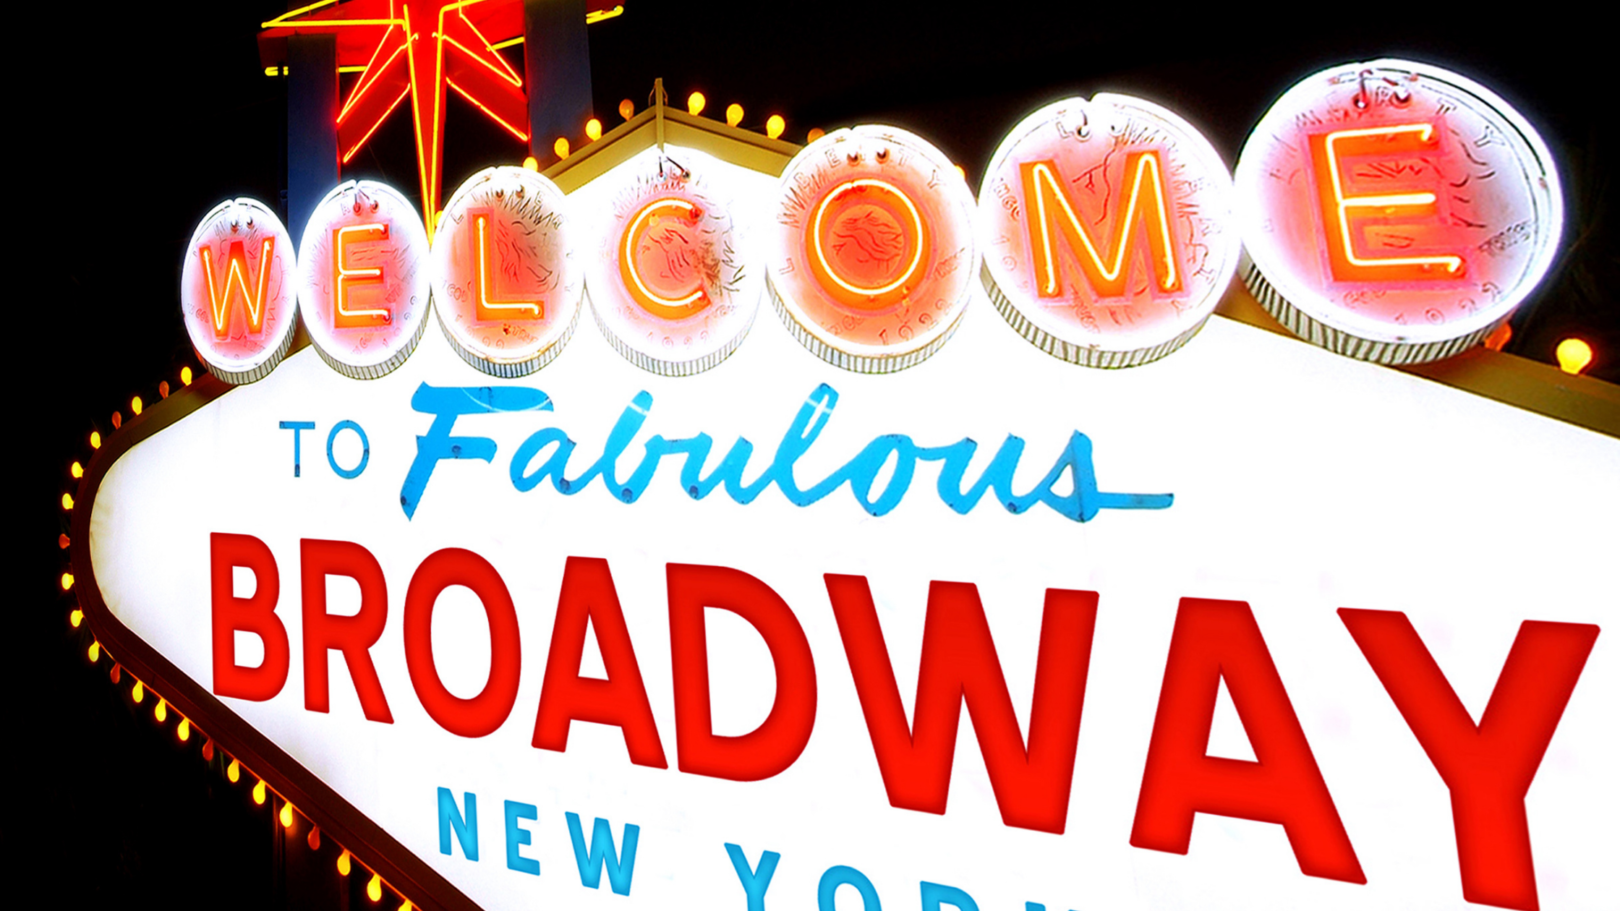 When Can Student Groups Return to Broadway? Banner Image